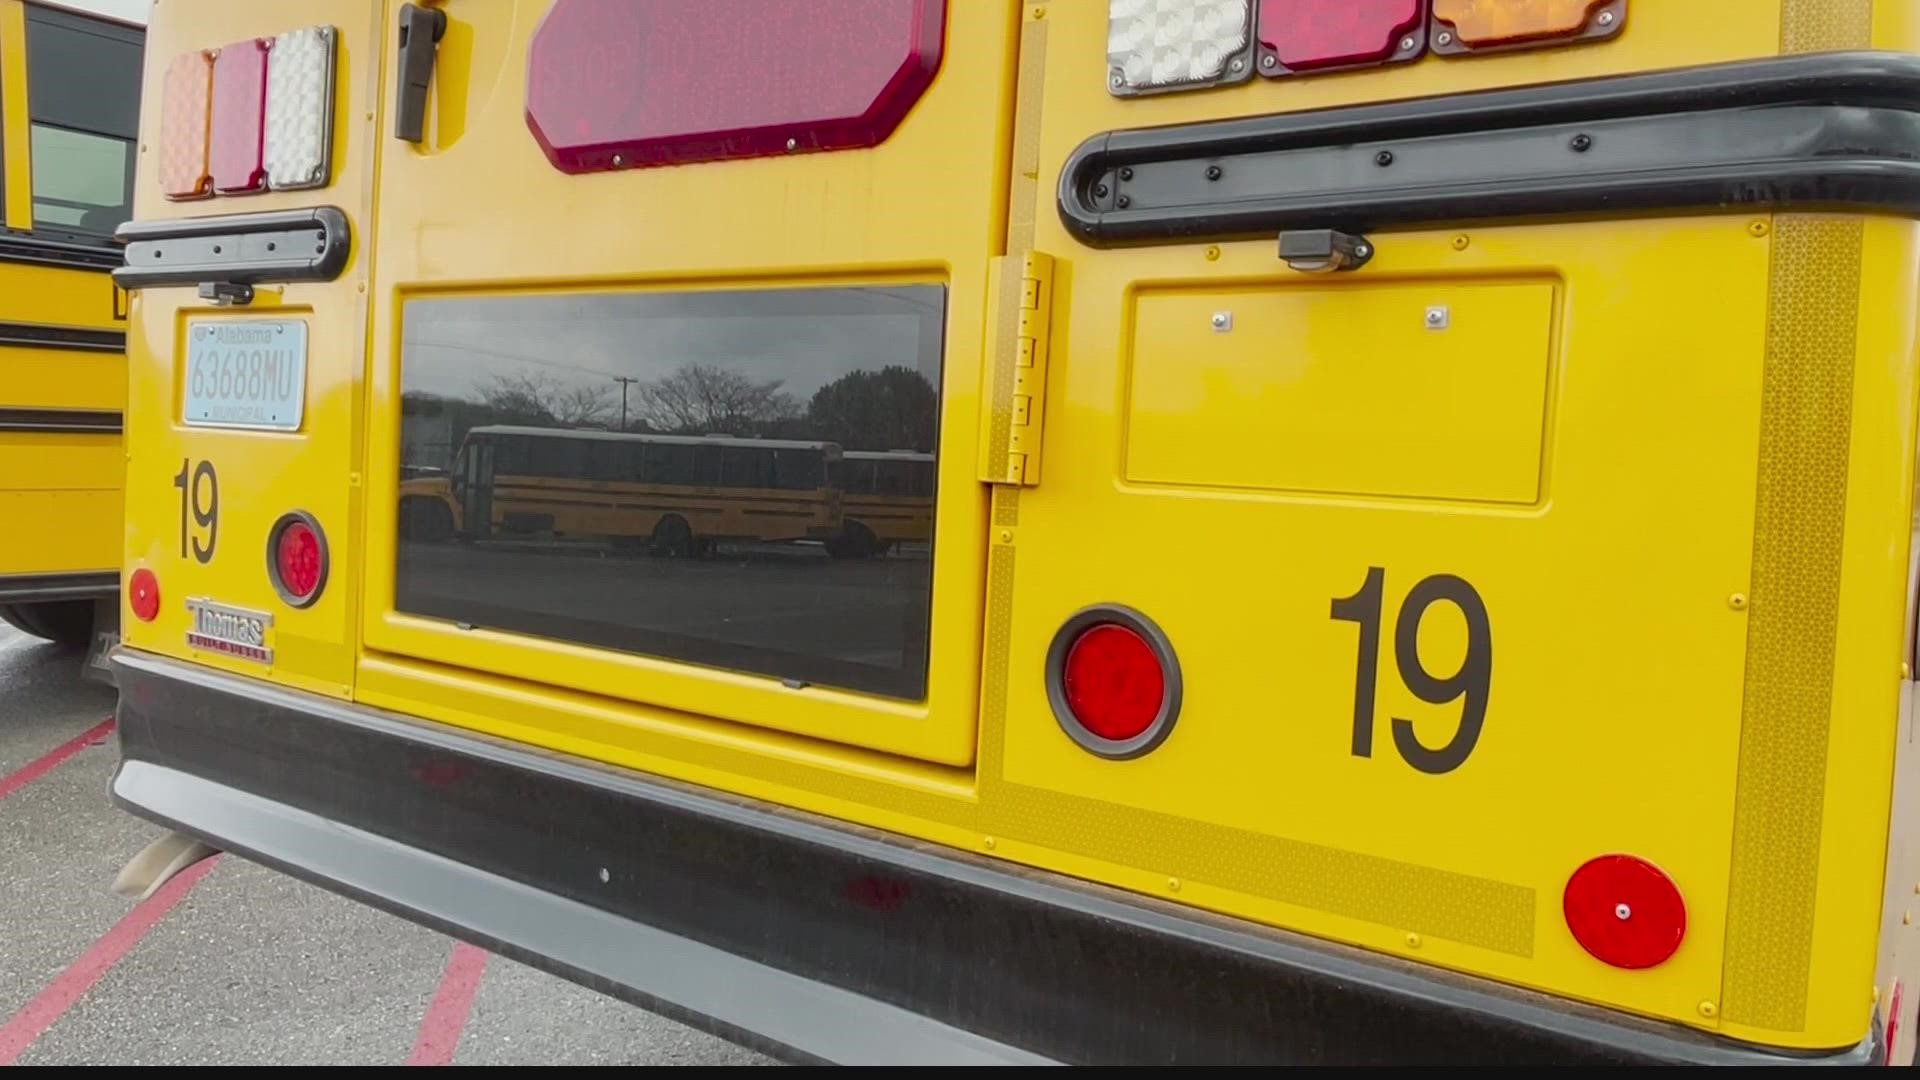 Safety first! Do you know what to do when you see a stopped school bus?